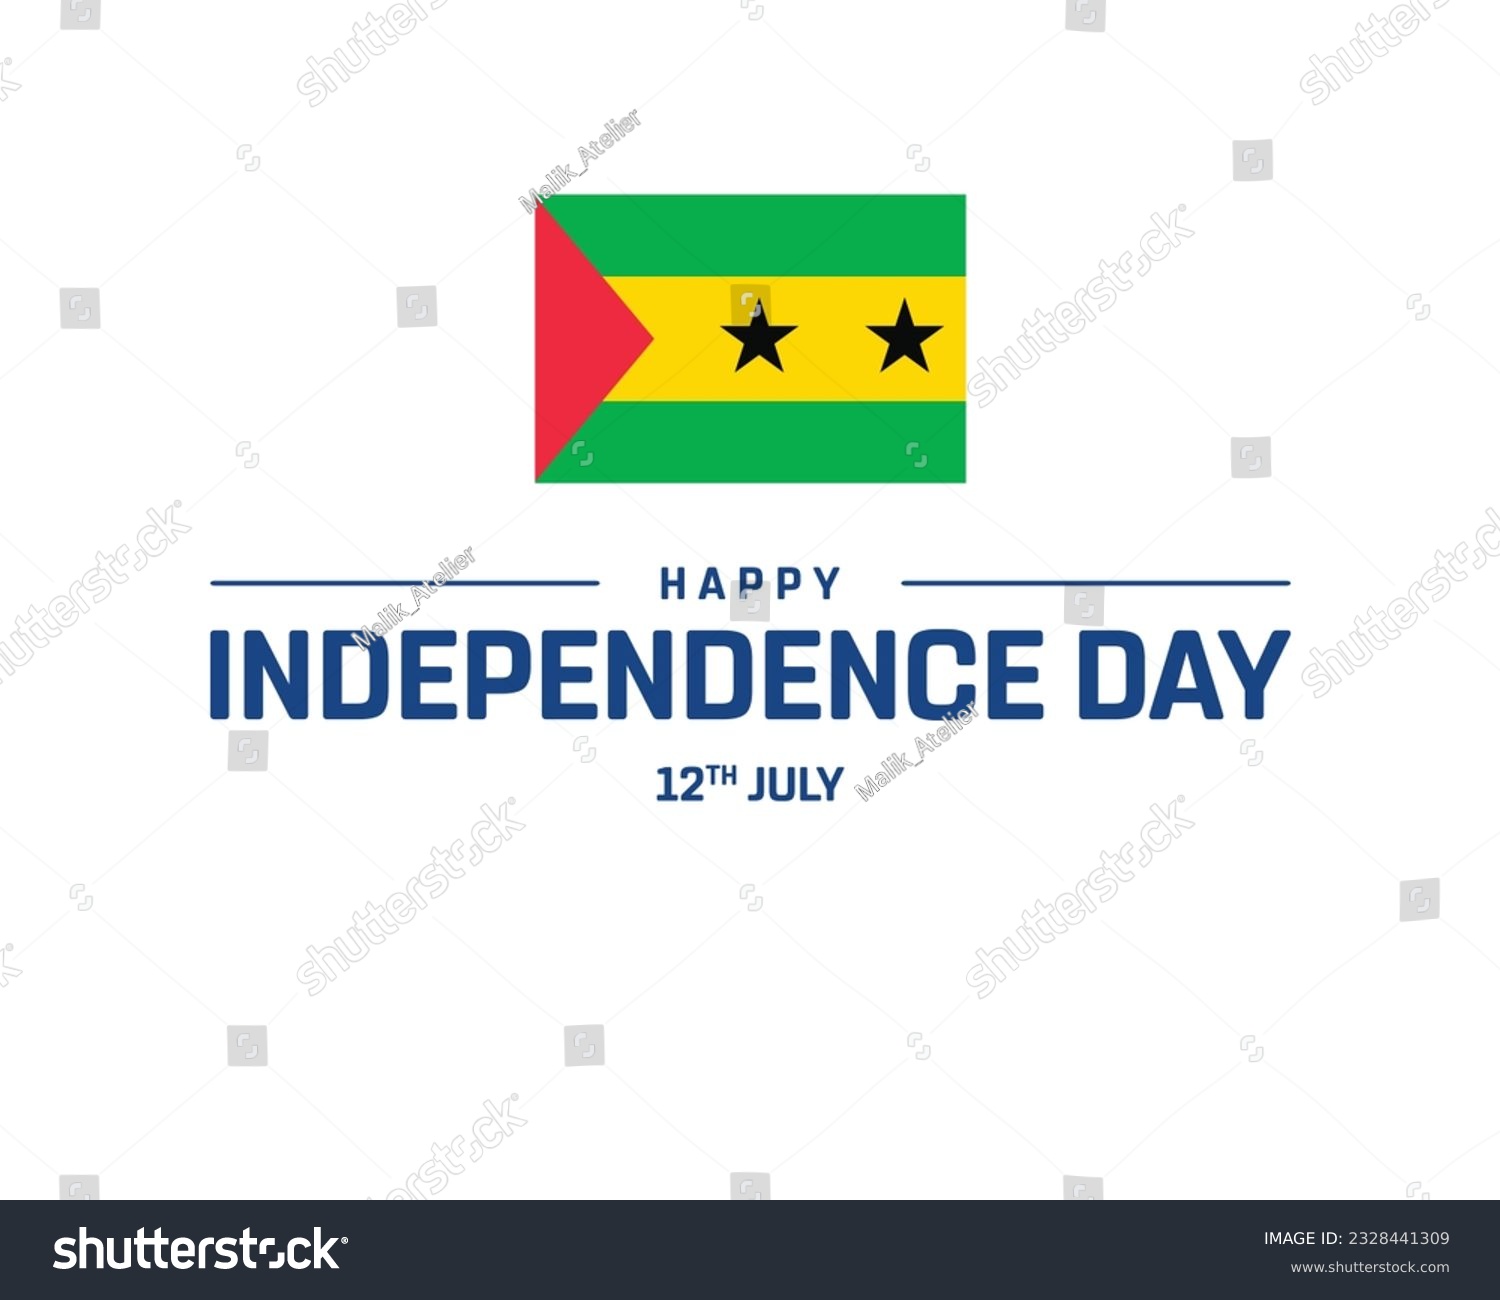 SVG of Happy Independence Day, Sao Tome and Principe Independence Day, Sao Tome and Principe, Flag of Sao Tome and Principe, 12 July, National Day svg